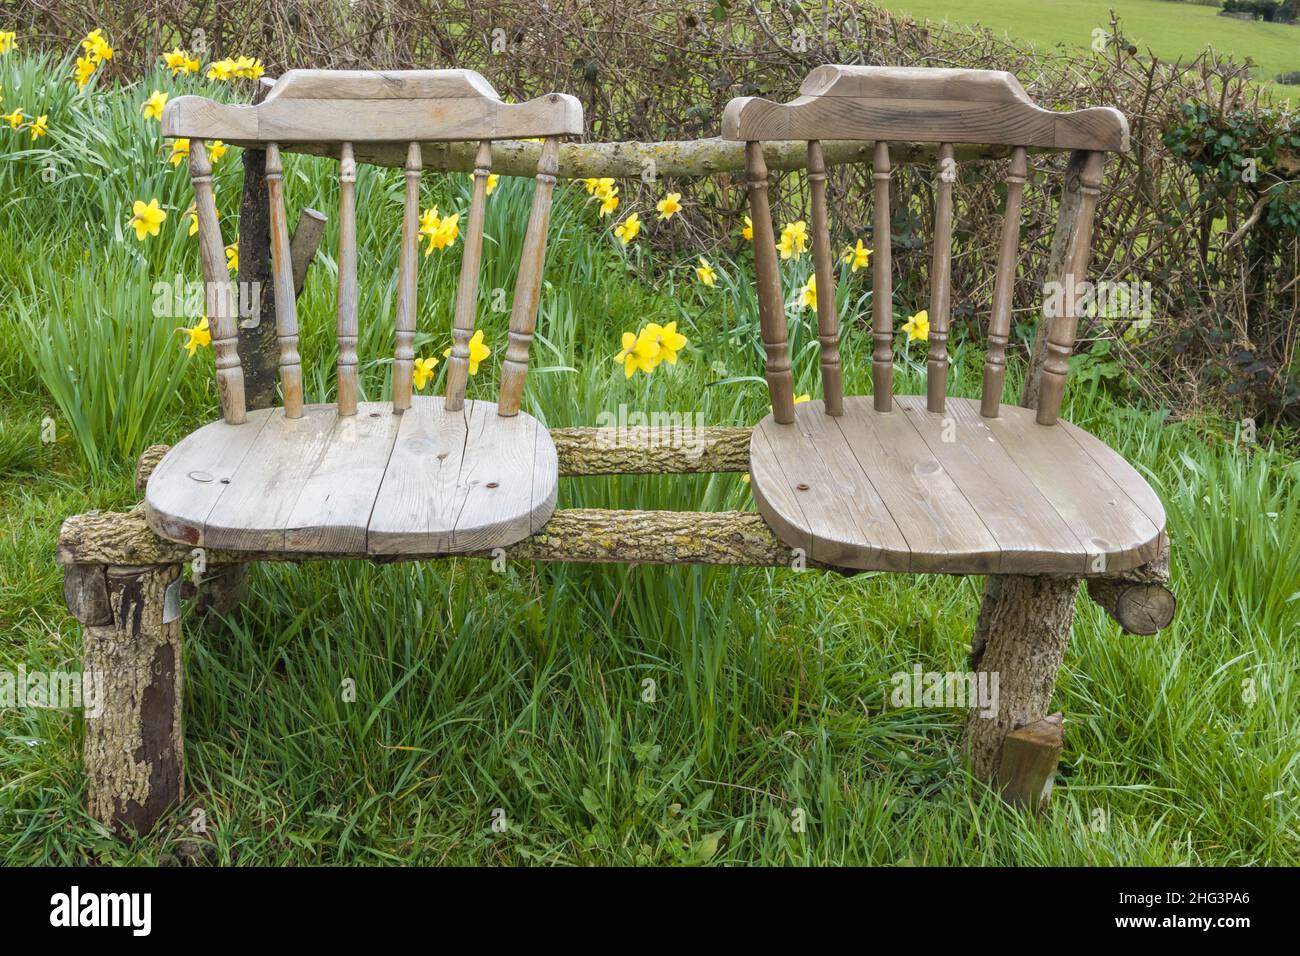 Recycled kitchen chairs now being used as a seat for walkers in the Herefordshire UK countryside,. March 2021 Stock Photo